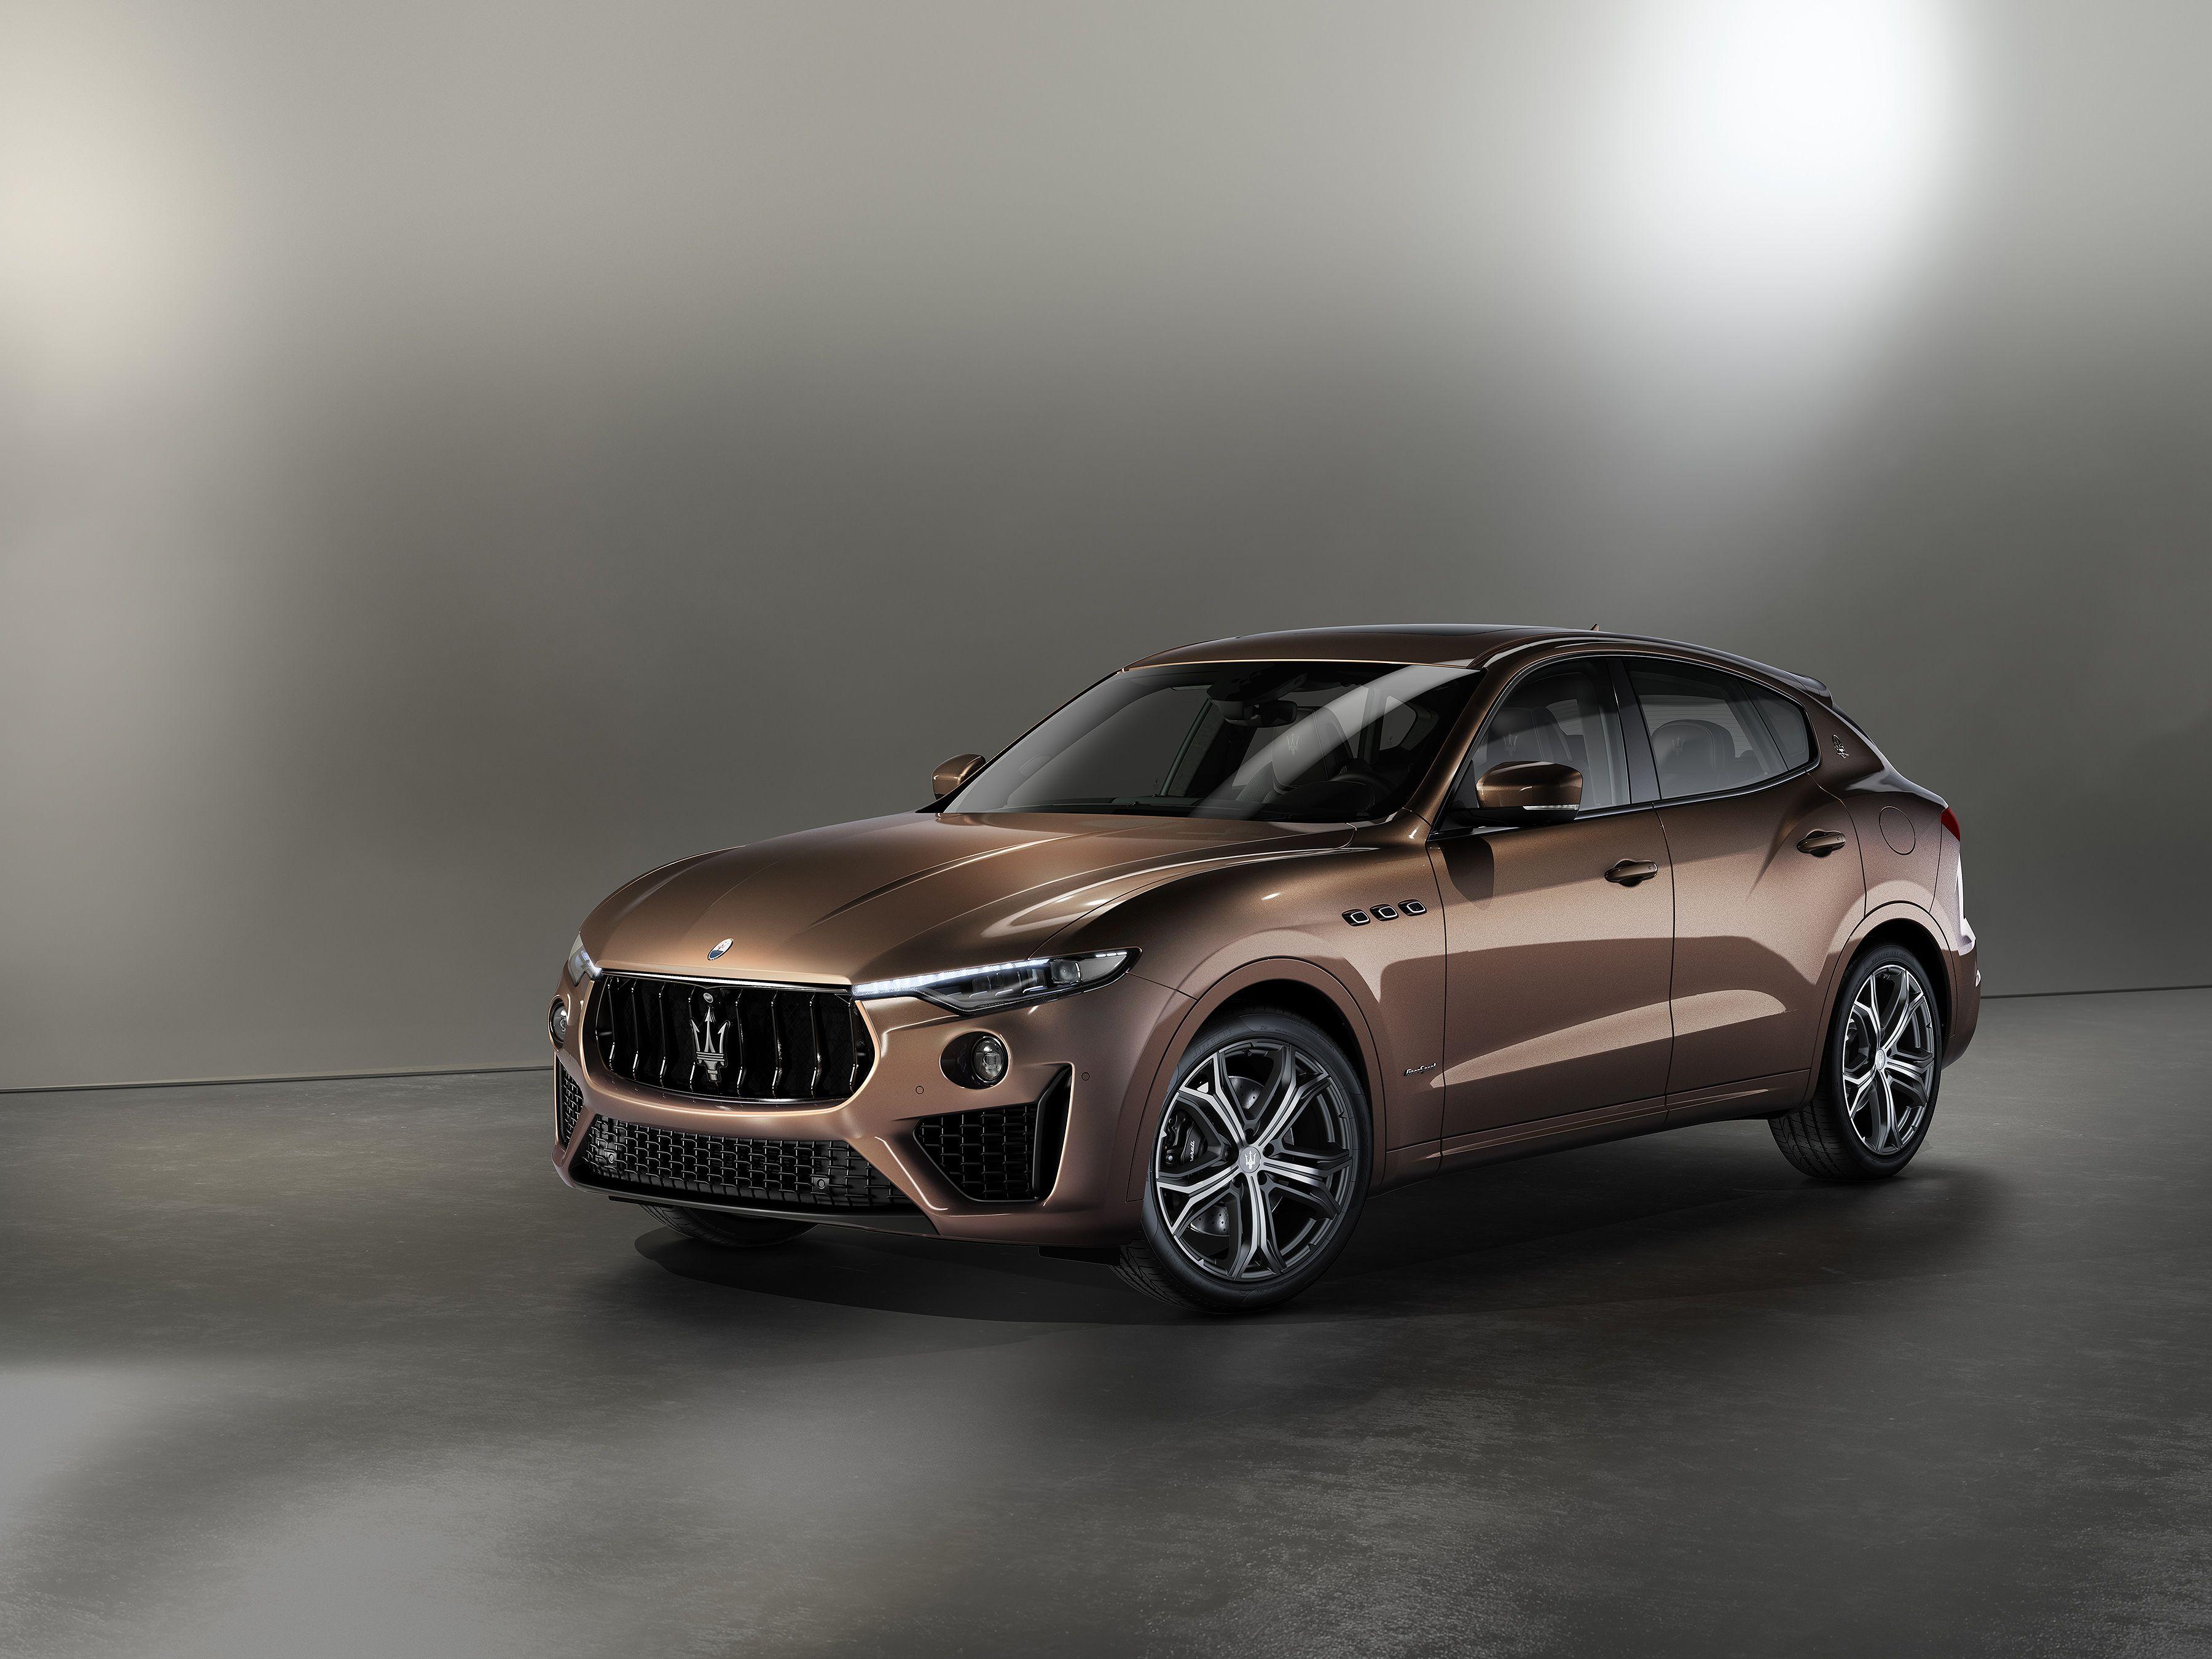 2020 Maserati Levante Review, Pricing, and Specs